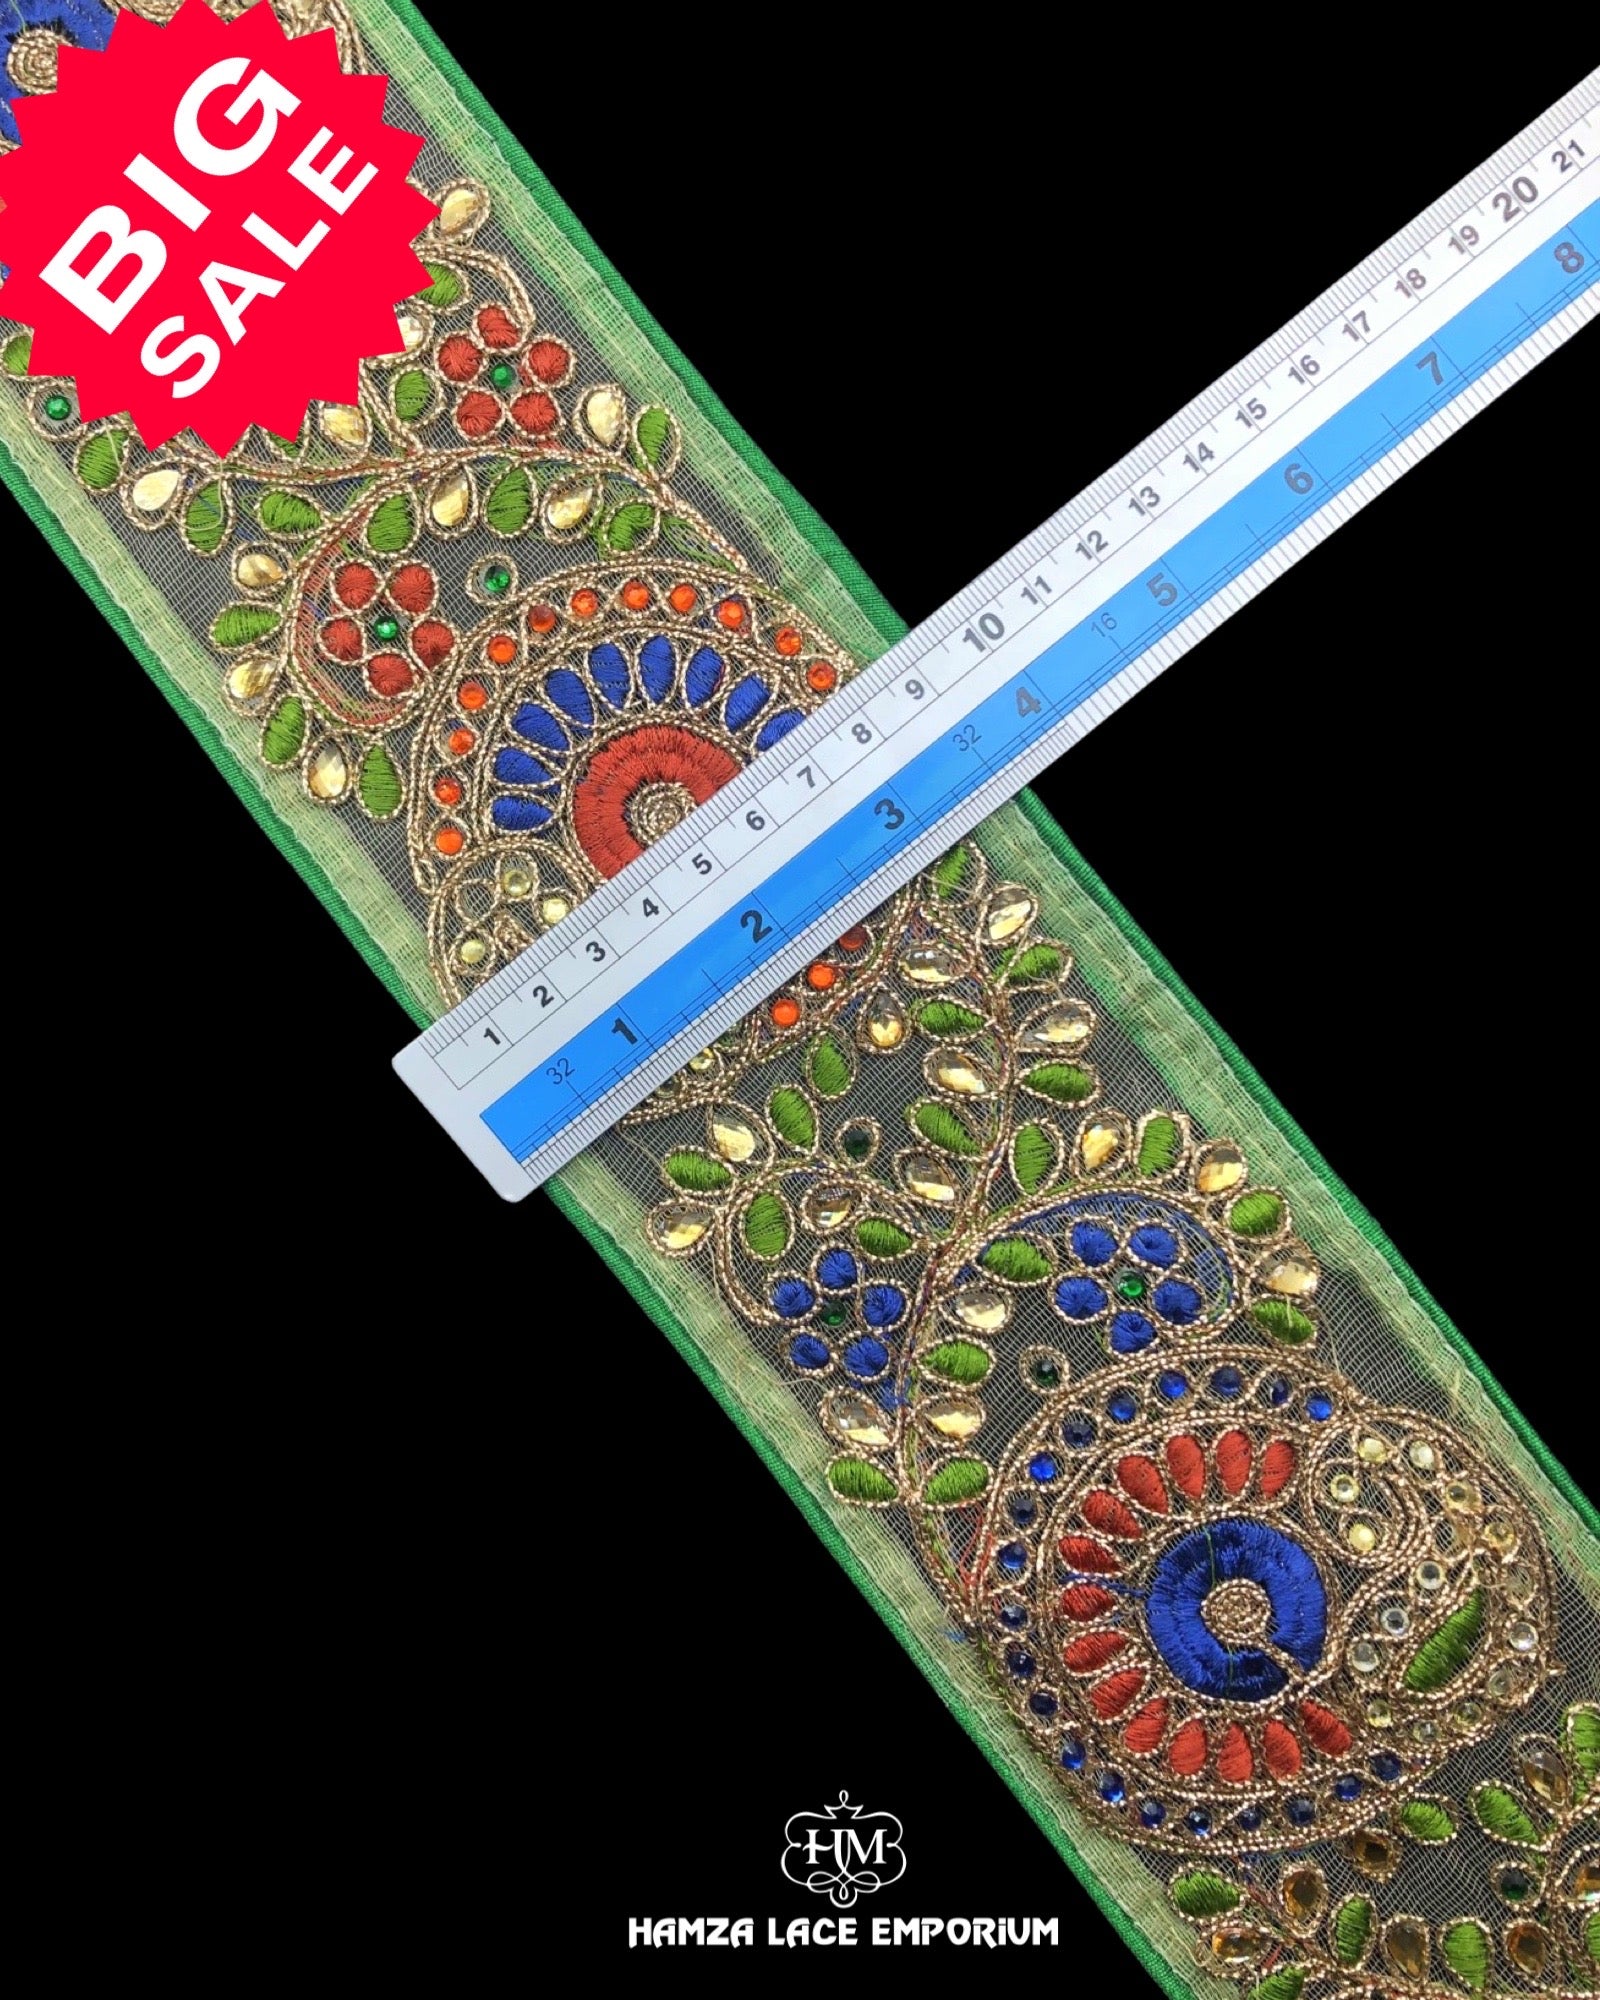 Size of the 'Multi Colored Stone Work Lace 6 Yard Piece' is shown as '3.5' inches with the help of a ruler